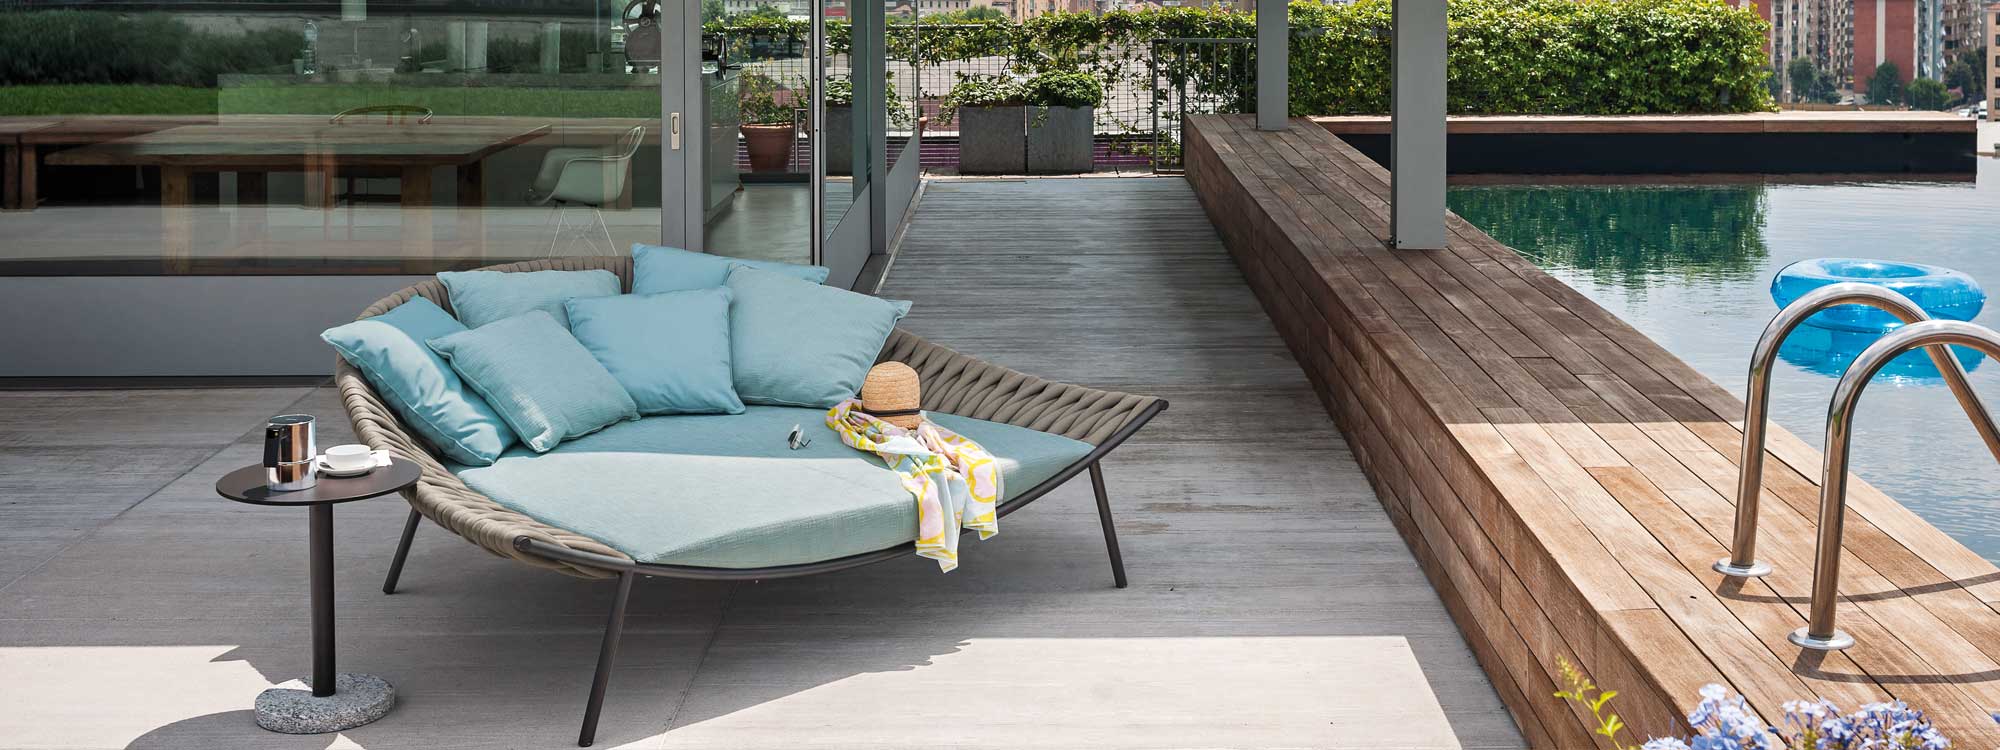 Image of RODA Arena daybed and Bernardo round side table on decked poolside